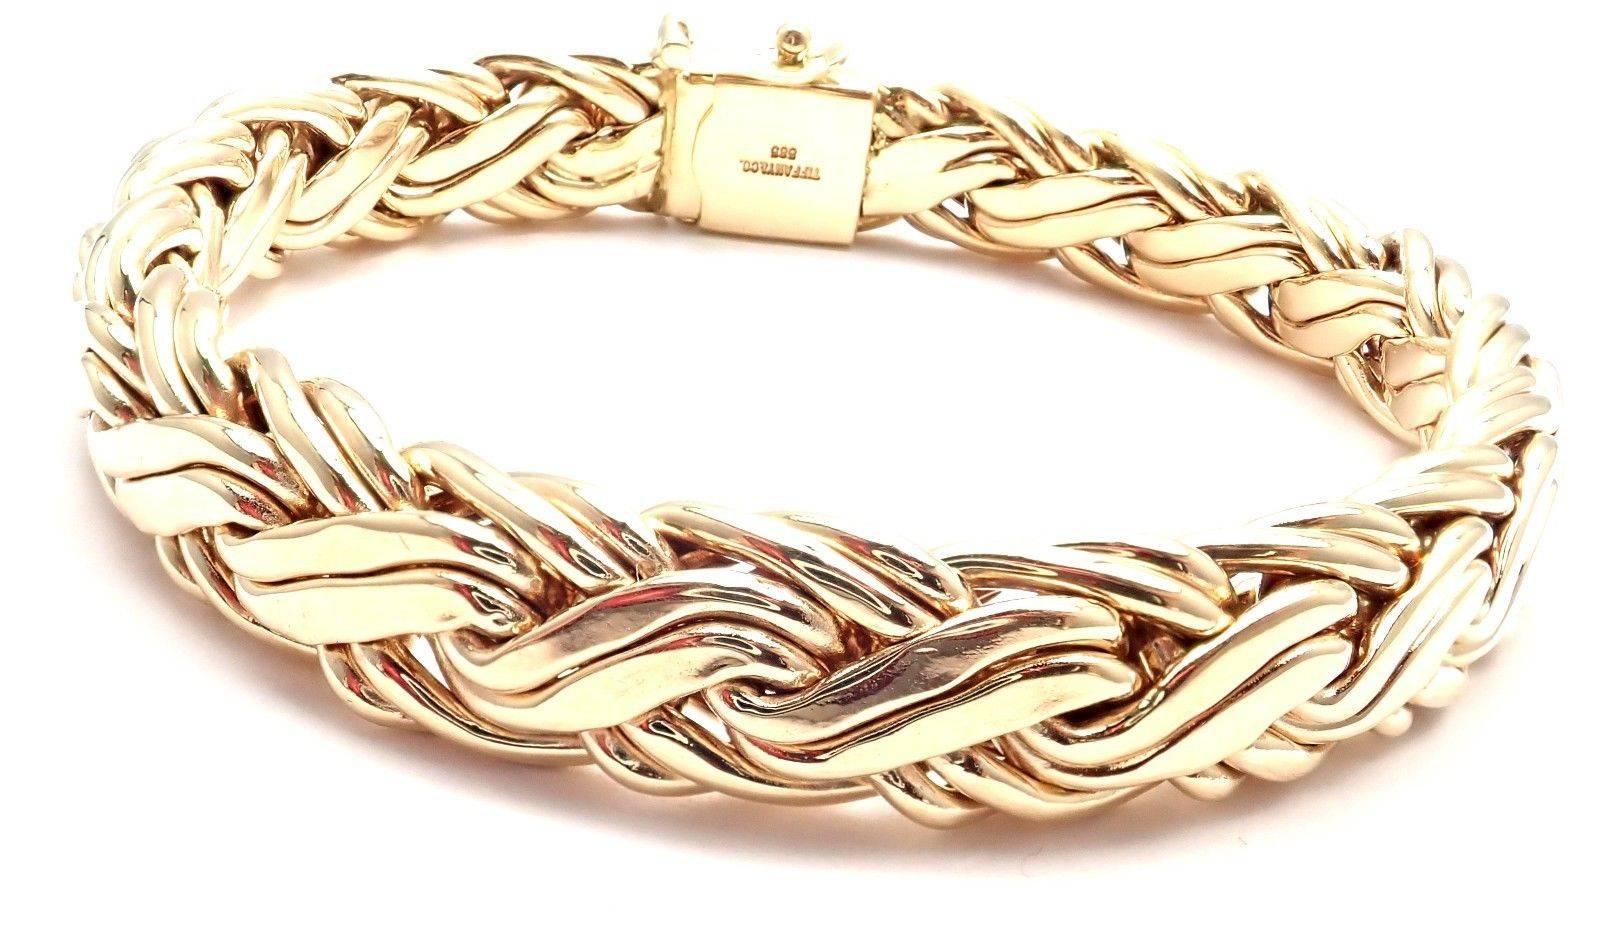 Yellow Gold Russian Weave Bracelet by Tiffany & Co.
Details: 
Length: 7.25